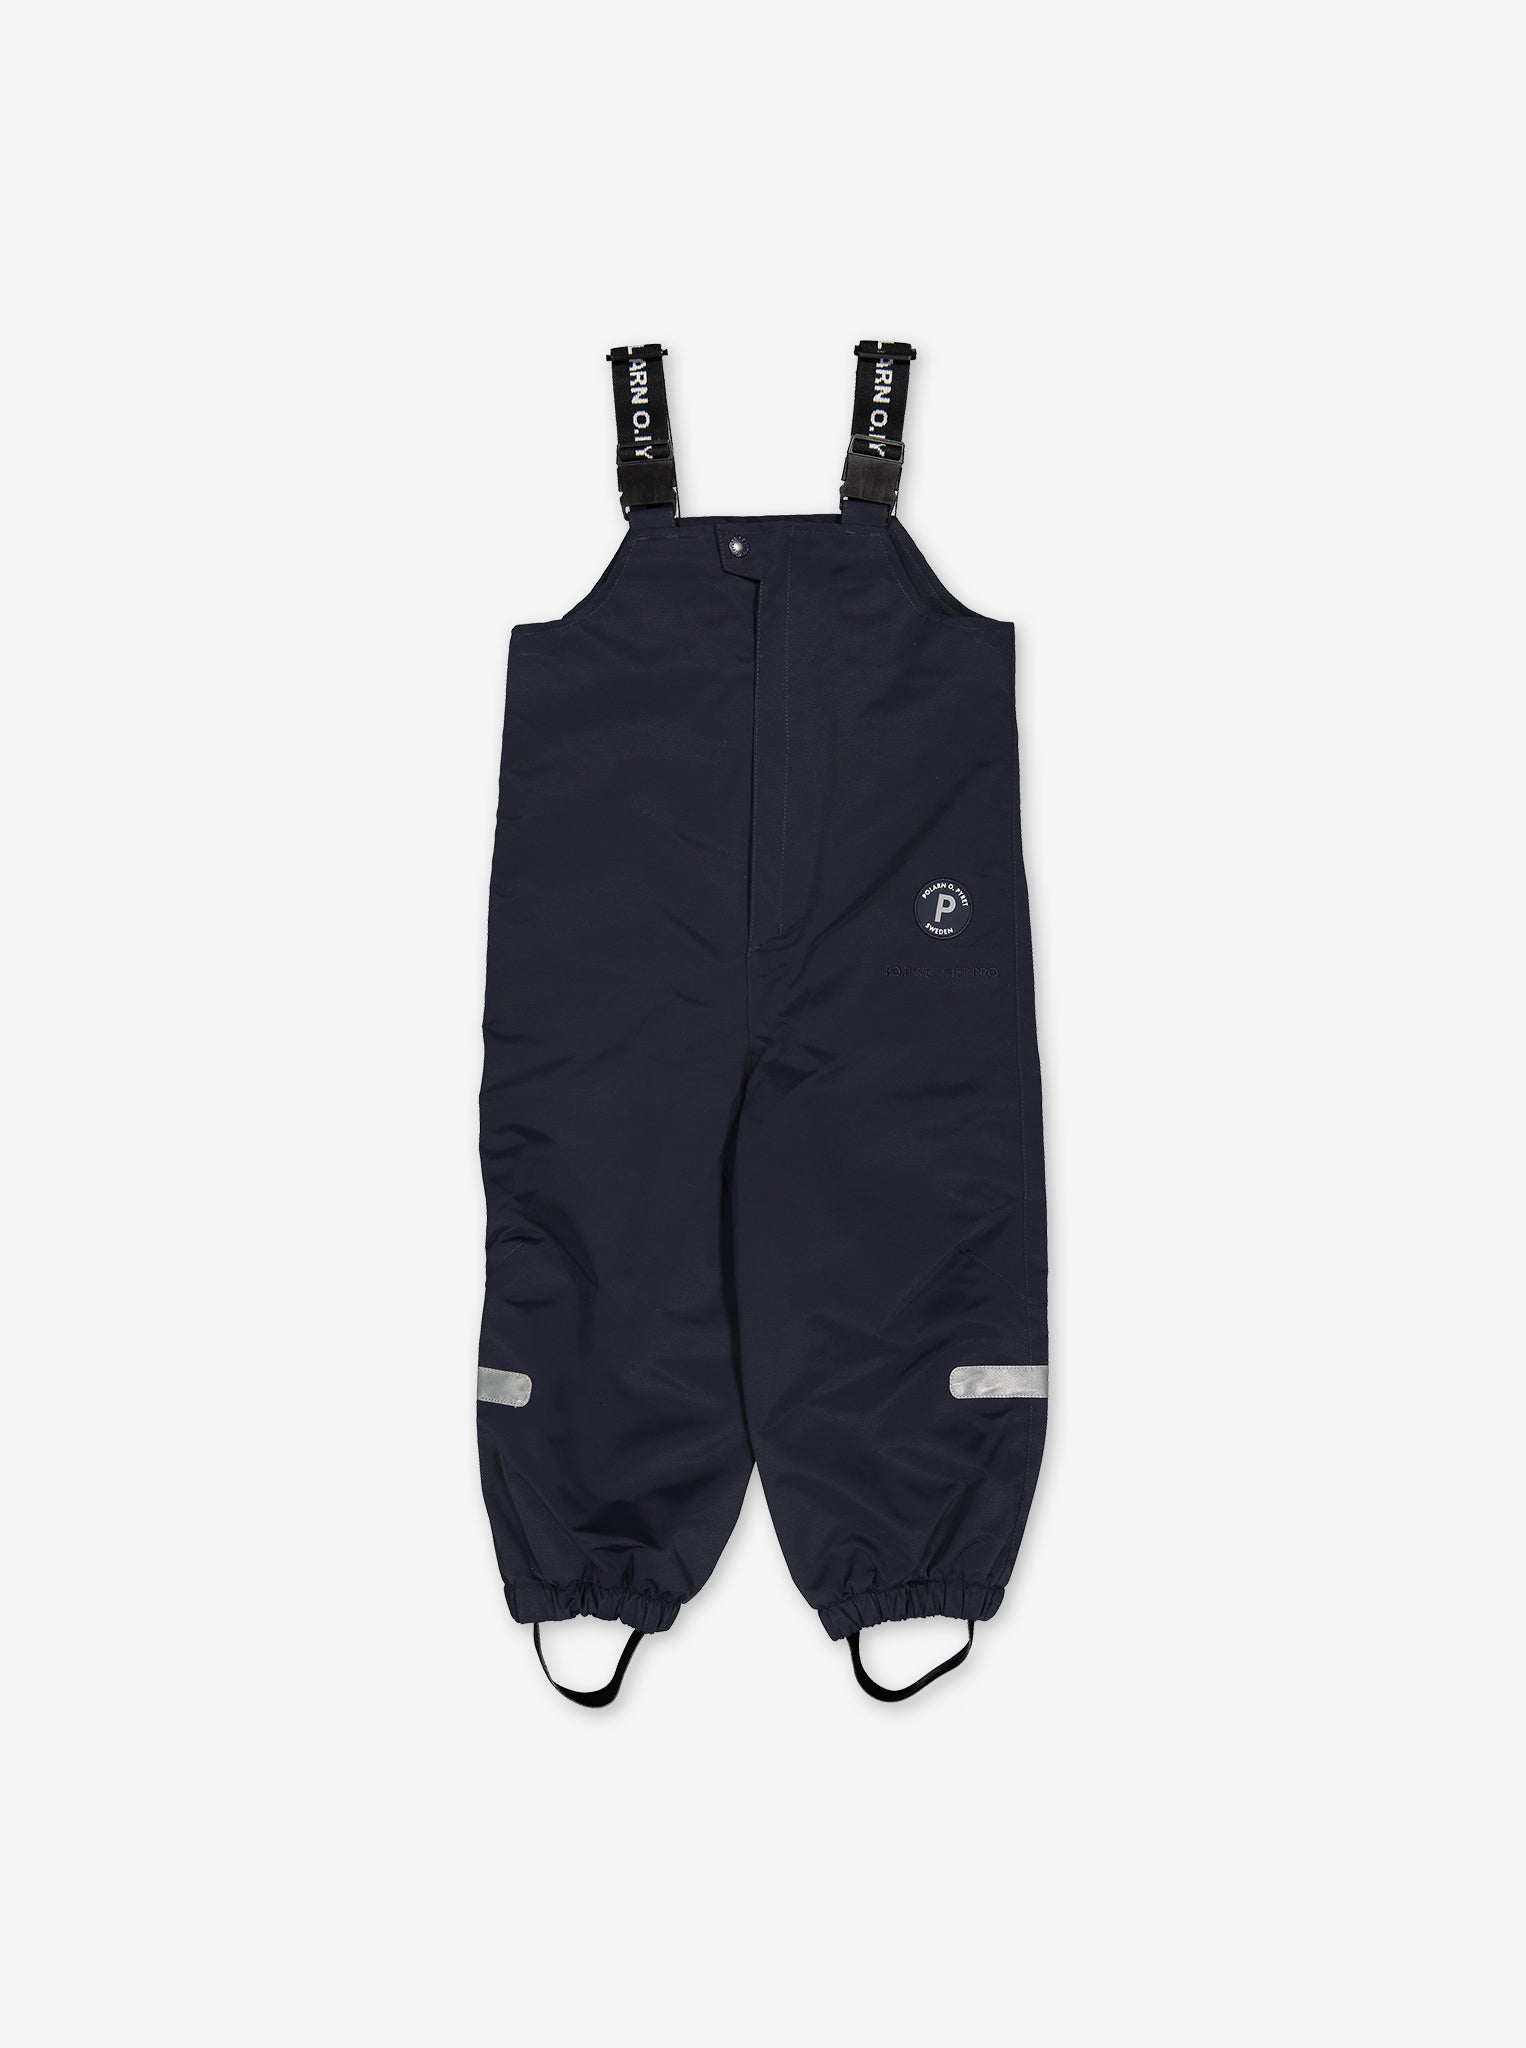 Shell Waterproof Baby Dungarees